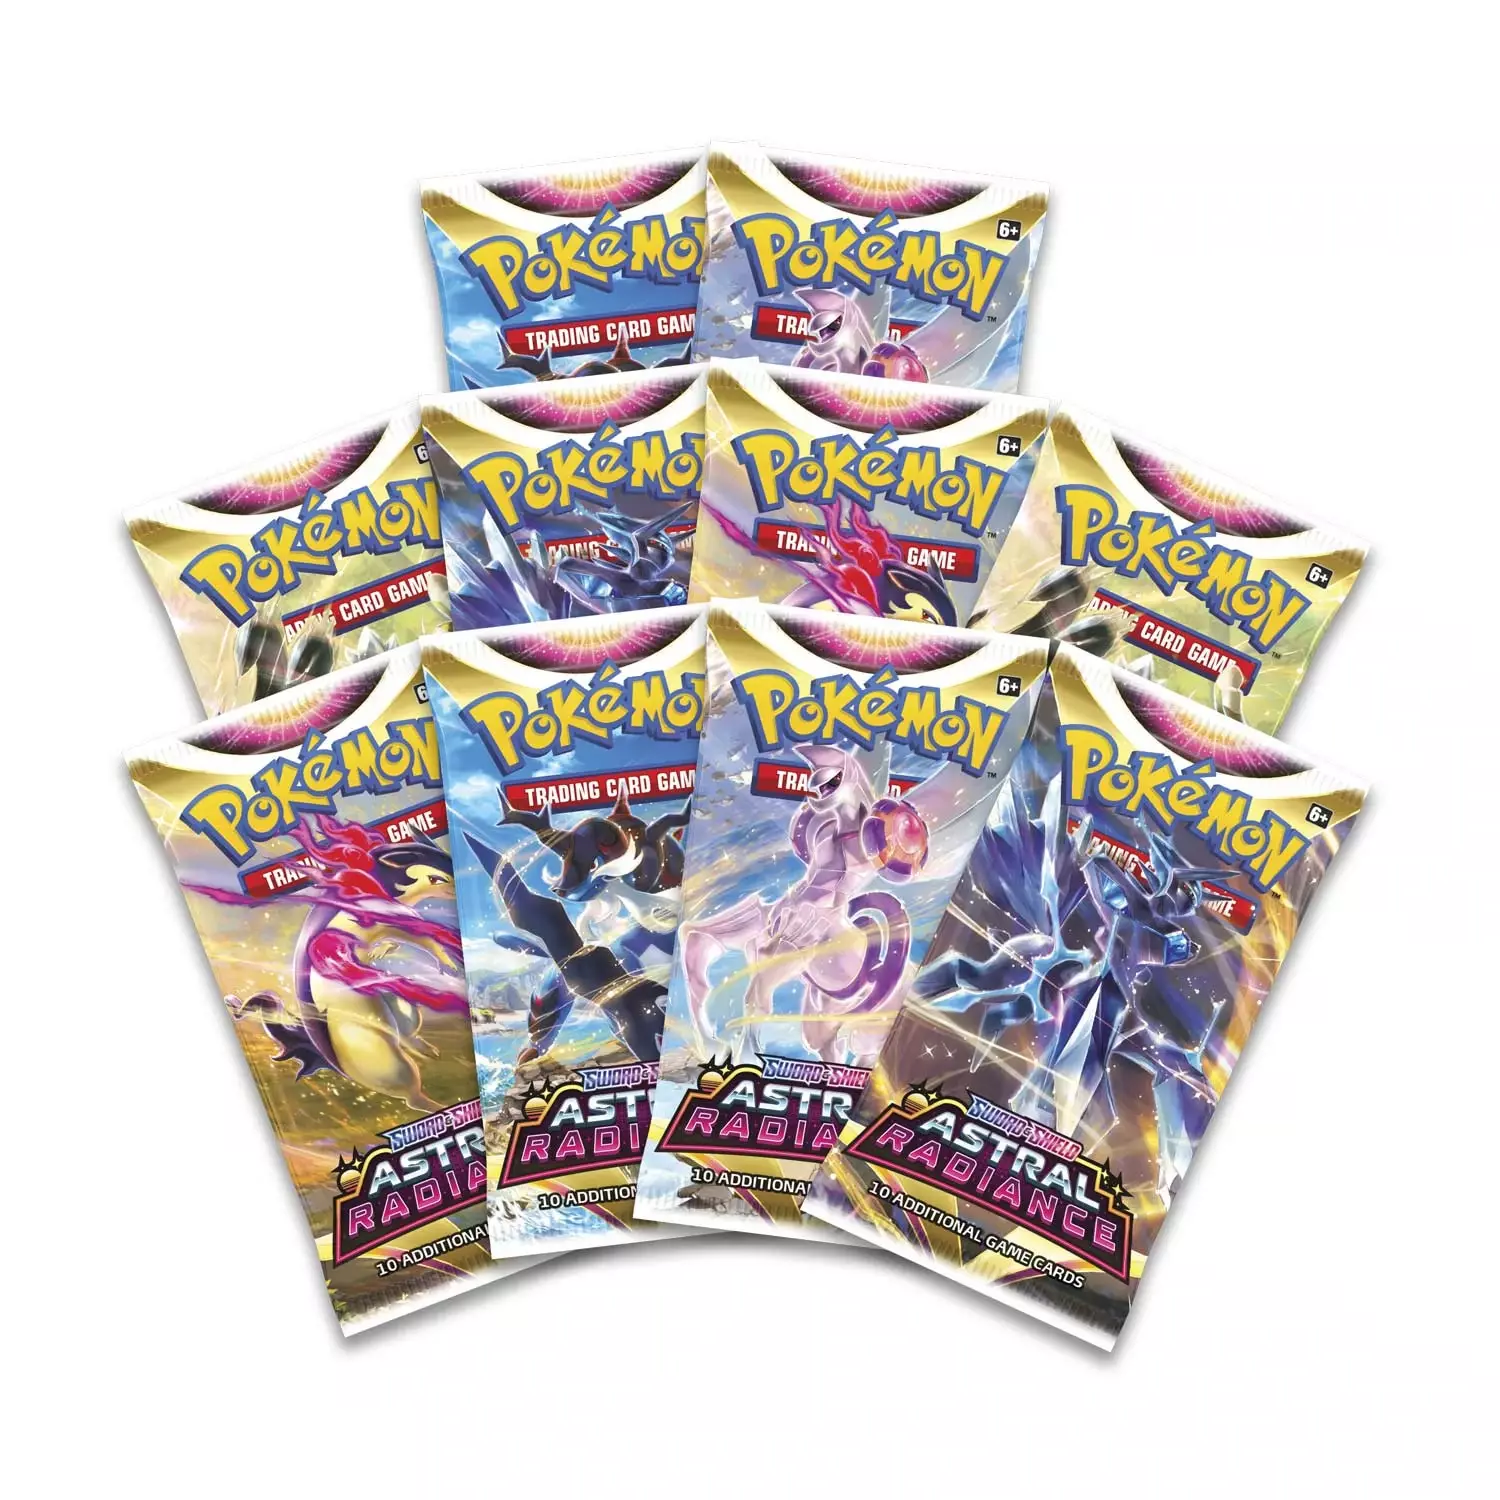 Pokemon Sword & Shield Astral Radiance Lot of 36 Loose Booster Packs